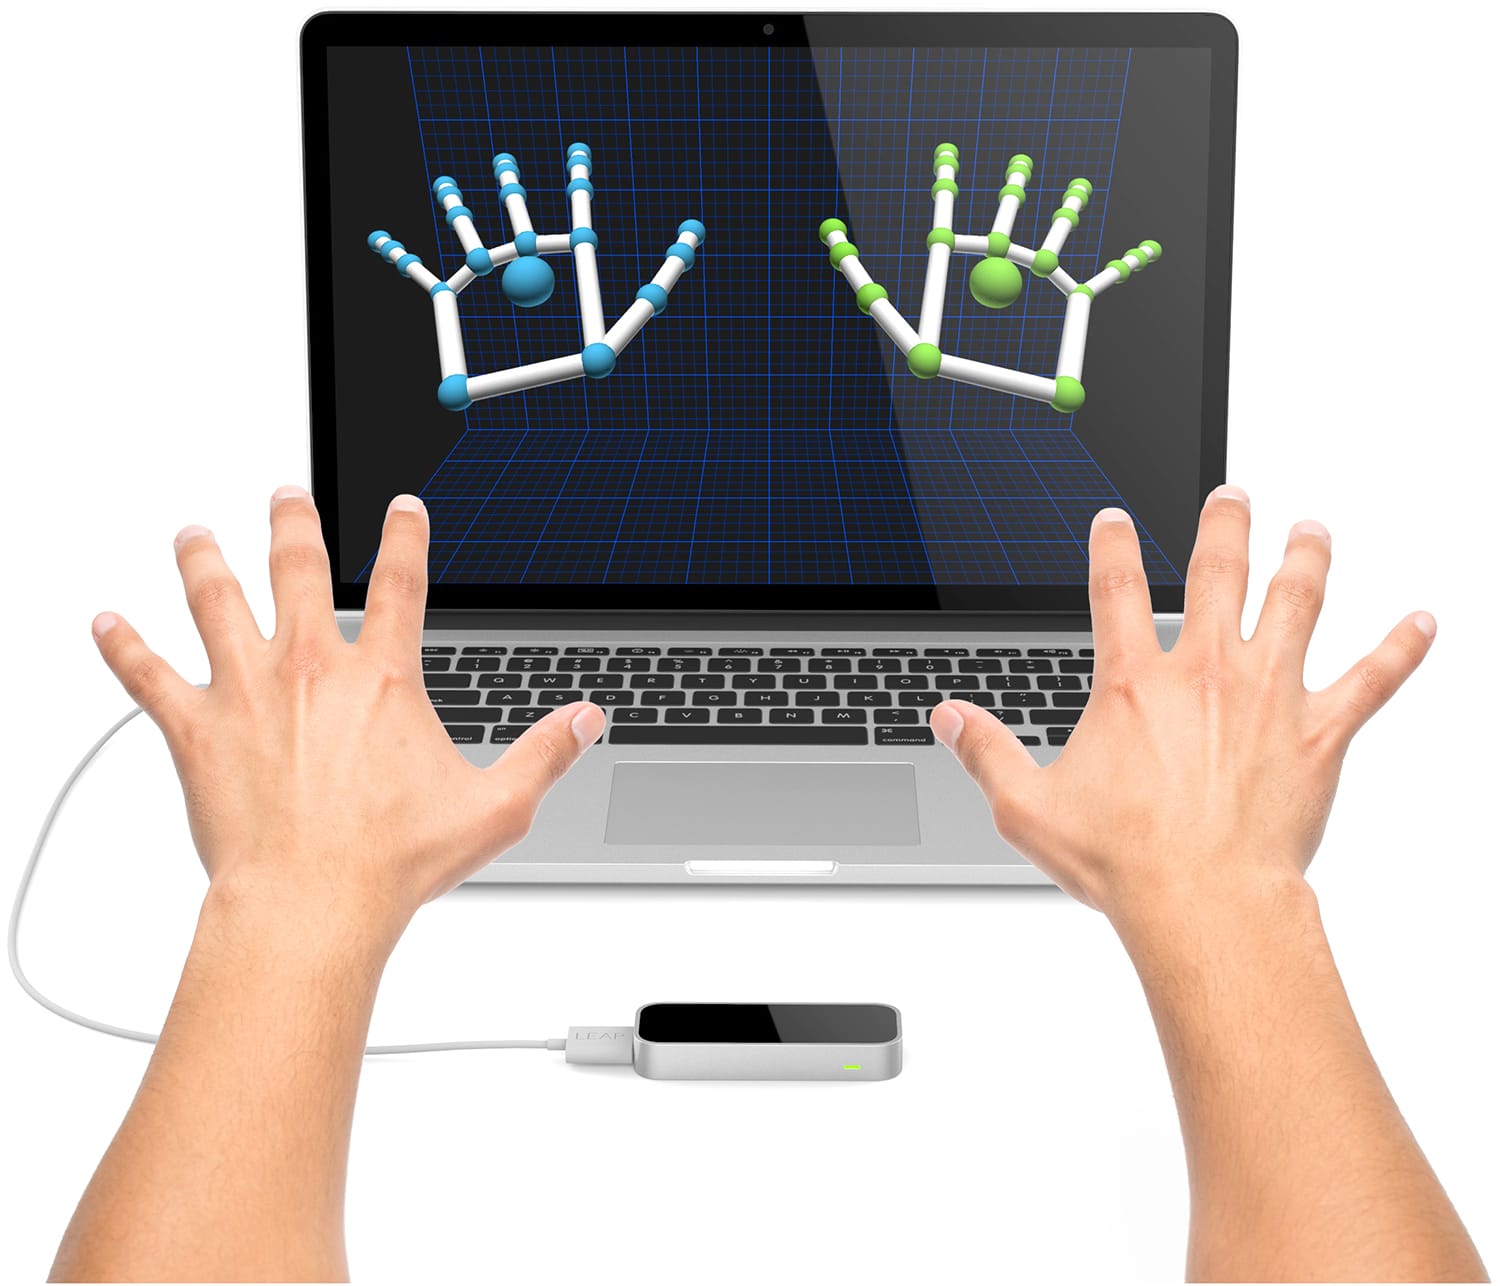 Real-time Robot Control with Leap Motion